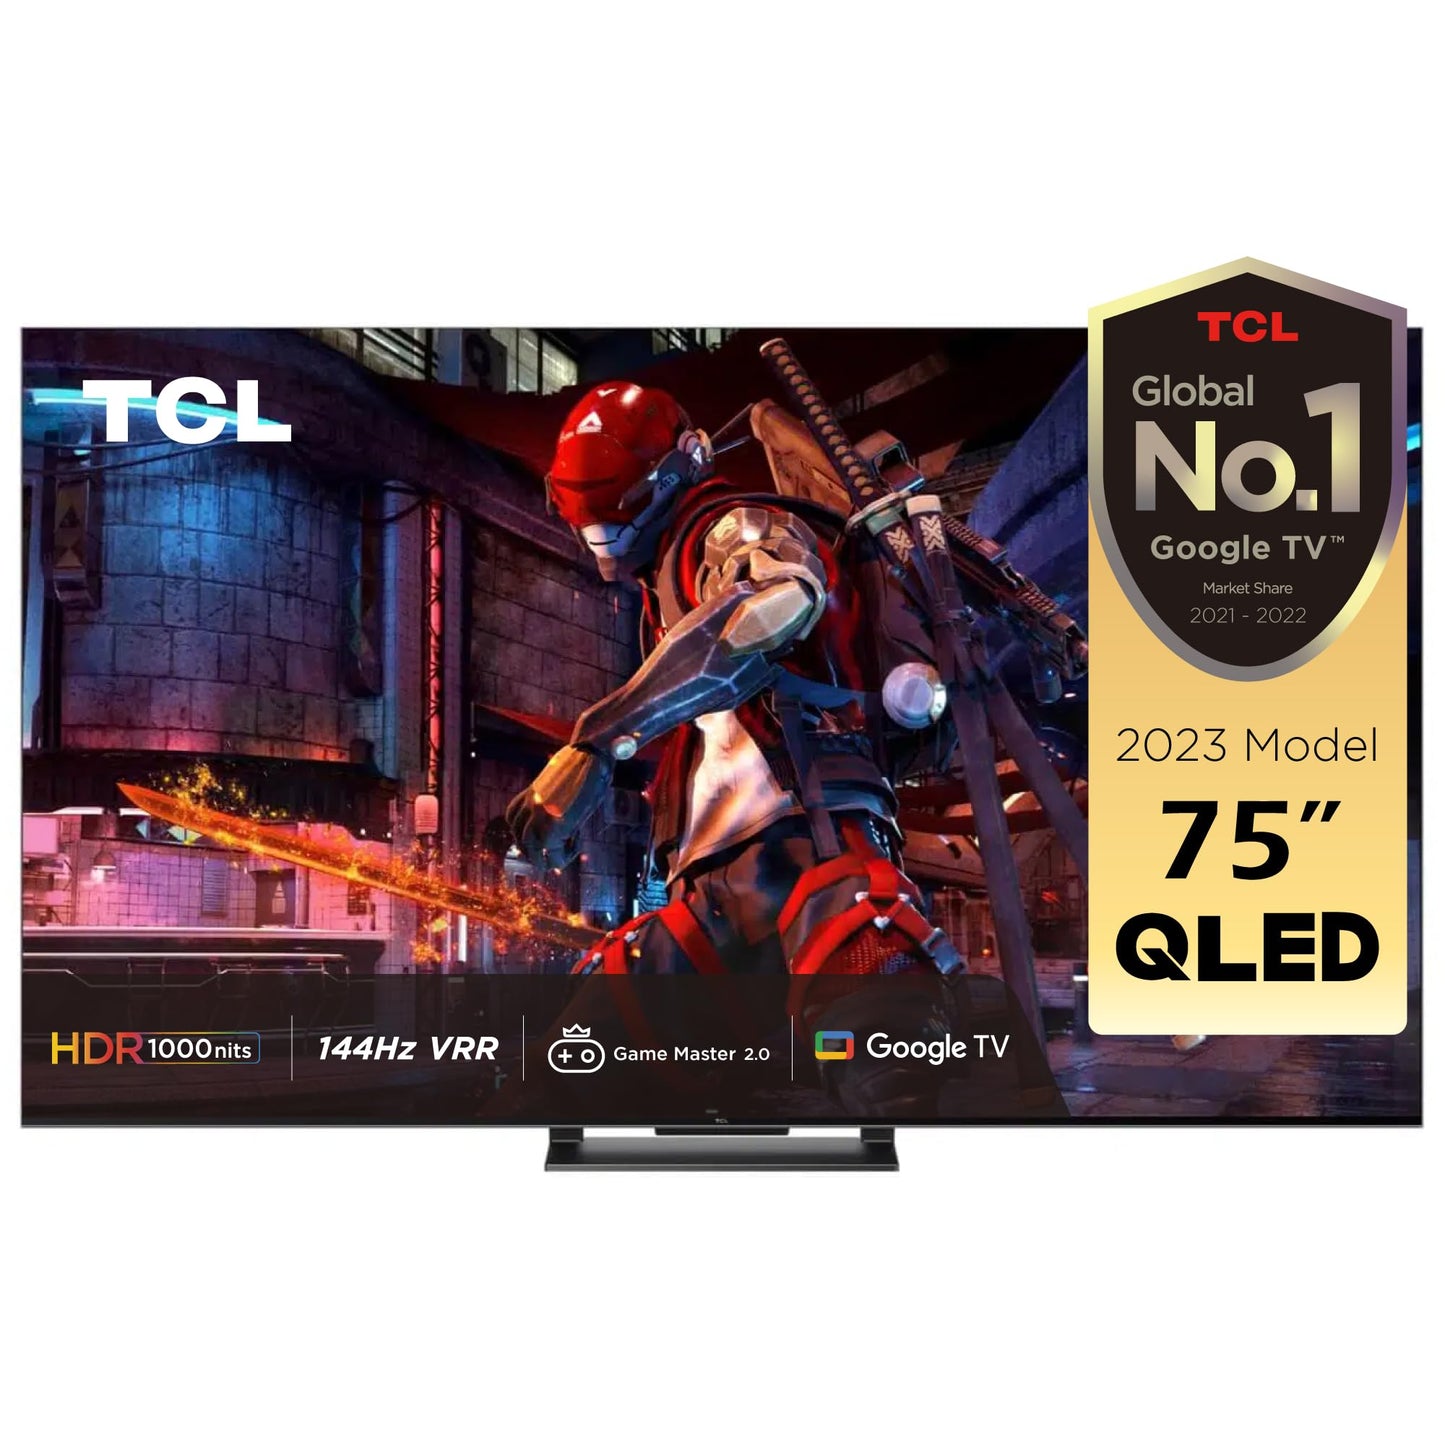 TCL 75 Inch 4K Ultra HD QLED Smart TV, Google TV with Hands-free Voice Control, Game Master 2.0, Dolby Vision IQ-Atmos, HDR 1000 nits, IMAX Enhanced, 144HZ VRR, 2023 Model, 75C745